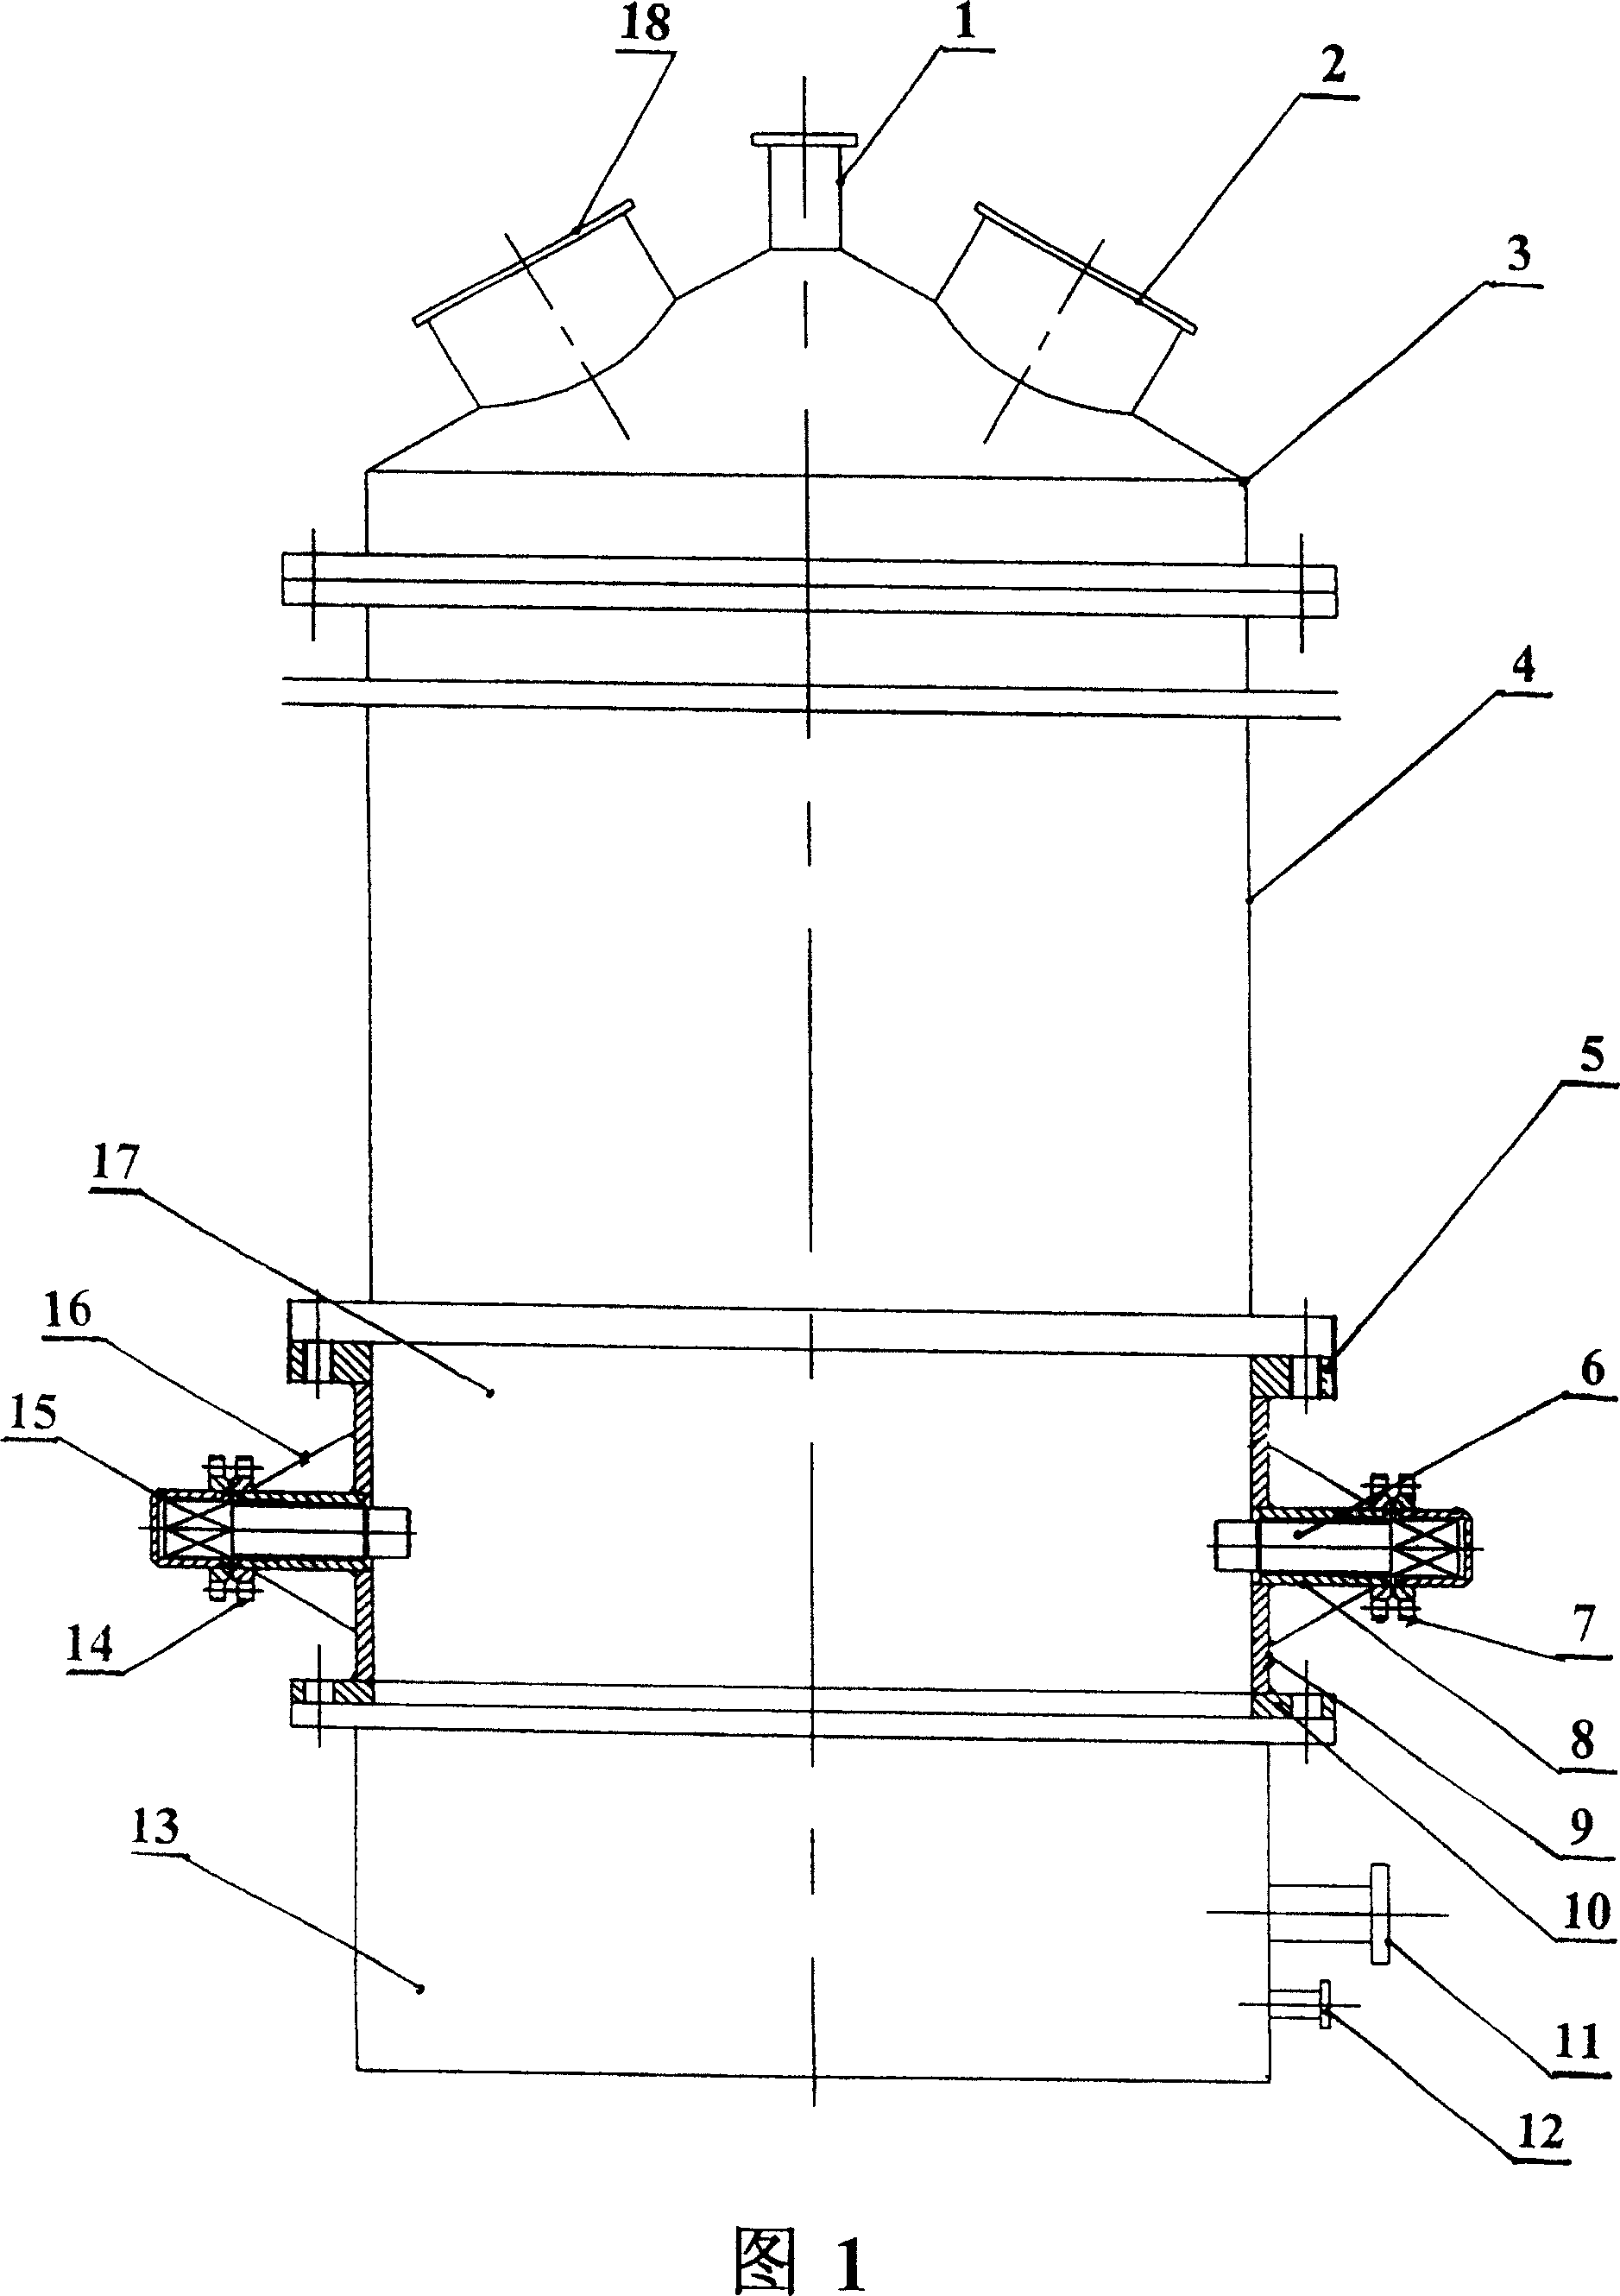 Copper wire tower having supporting device used for removing vanadium impurity in titanium tetrachloride